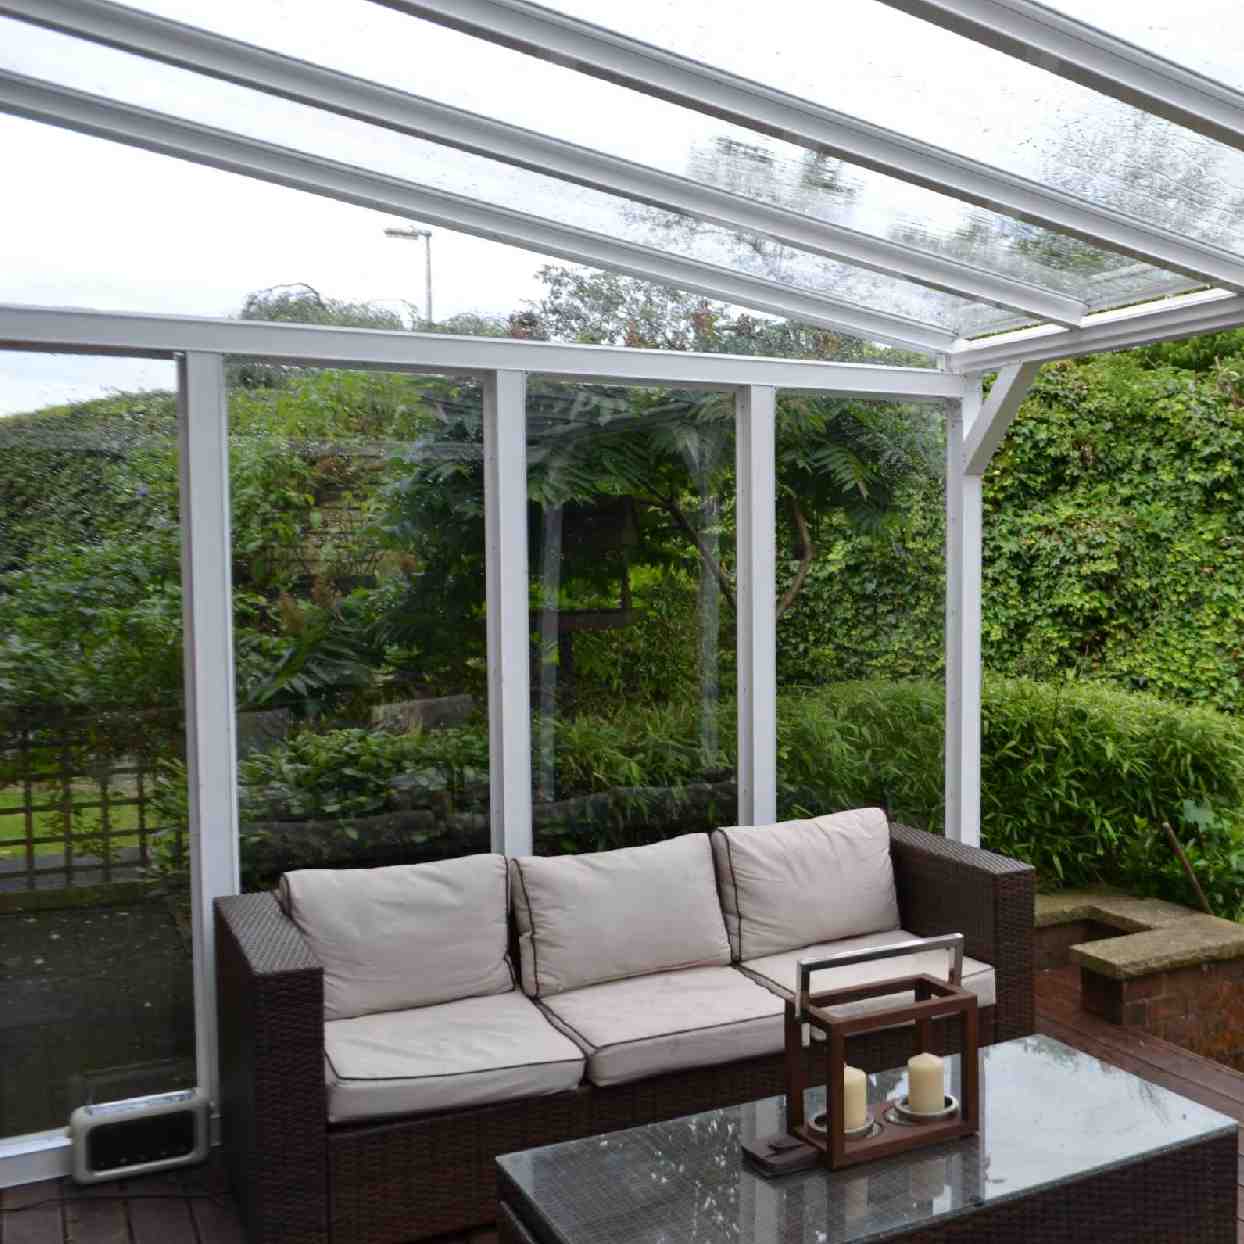 Buy Omega Verandah White with 6mm Glass Clear Plate Polycarbonate Glazing - 7.4m (W) x 4.0m (P), (4) Supporting Posts online today